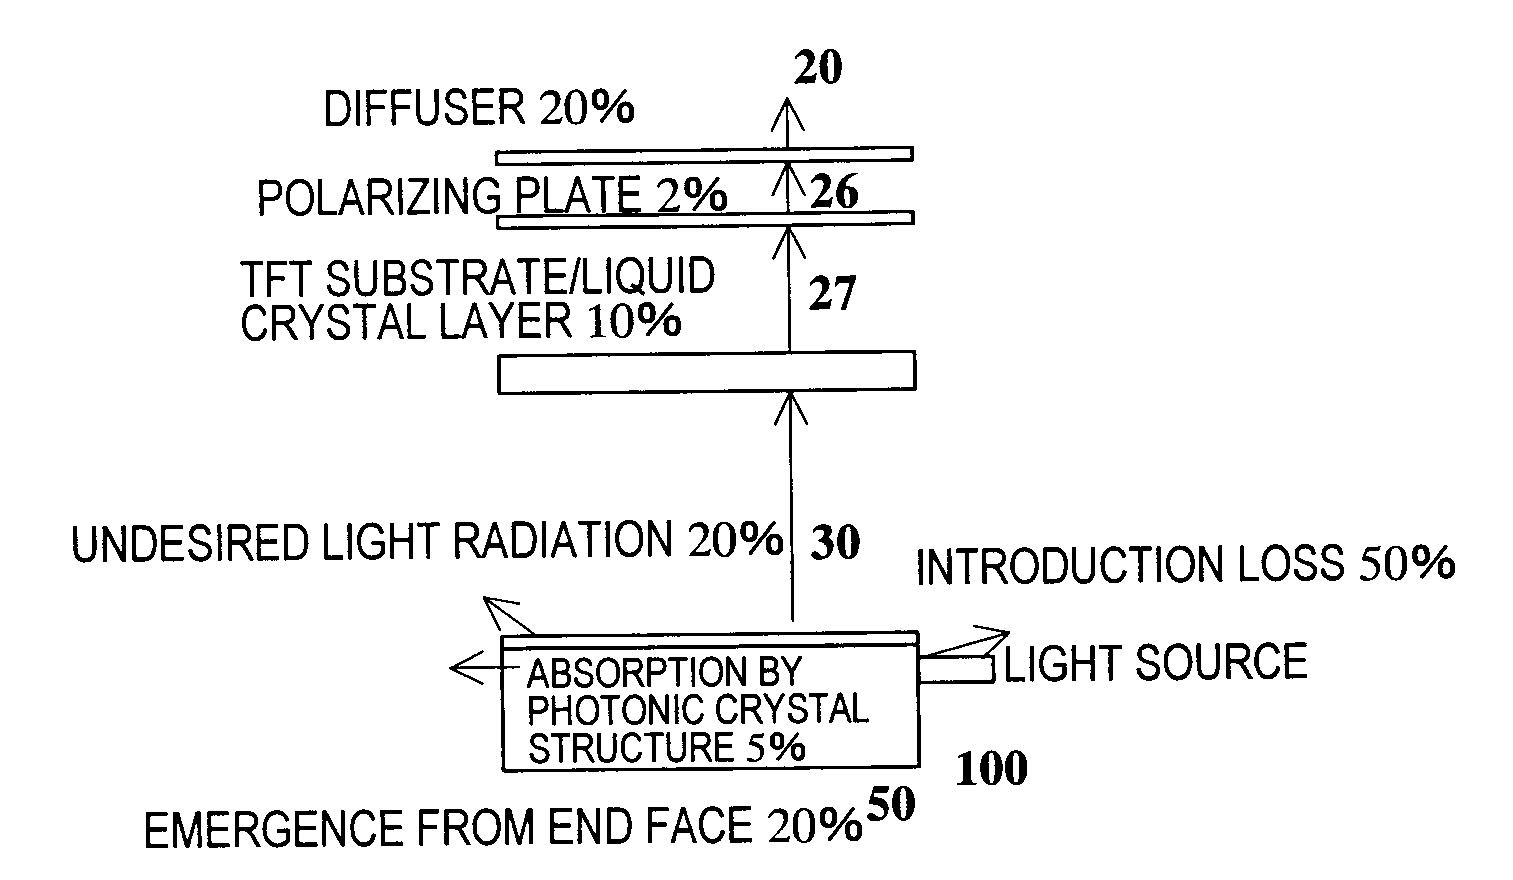 Light guiding body, substrate for display device, and display device